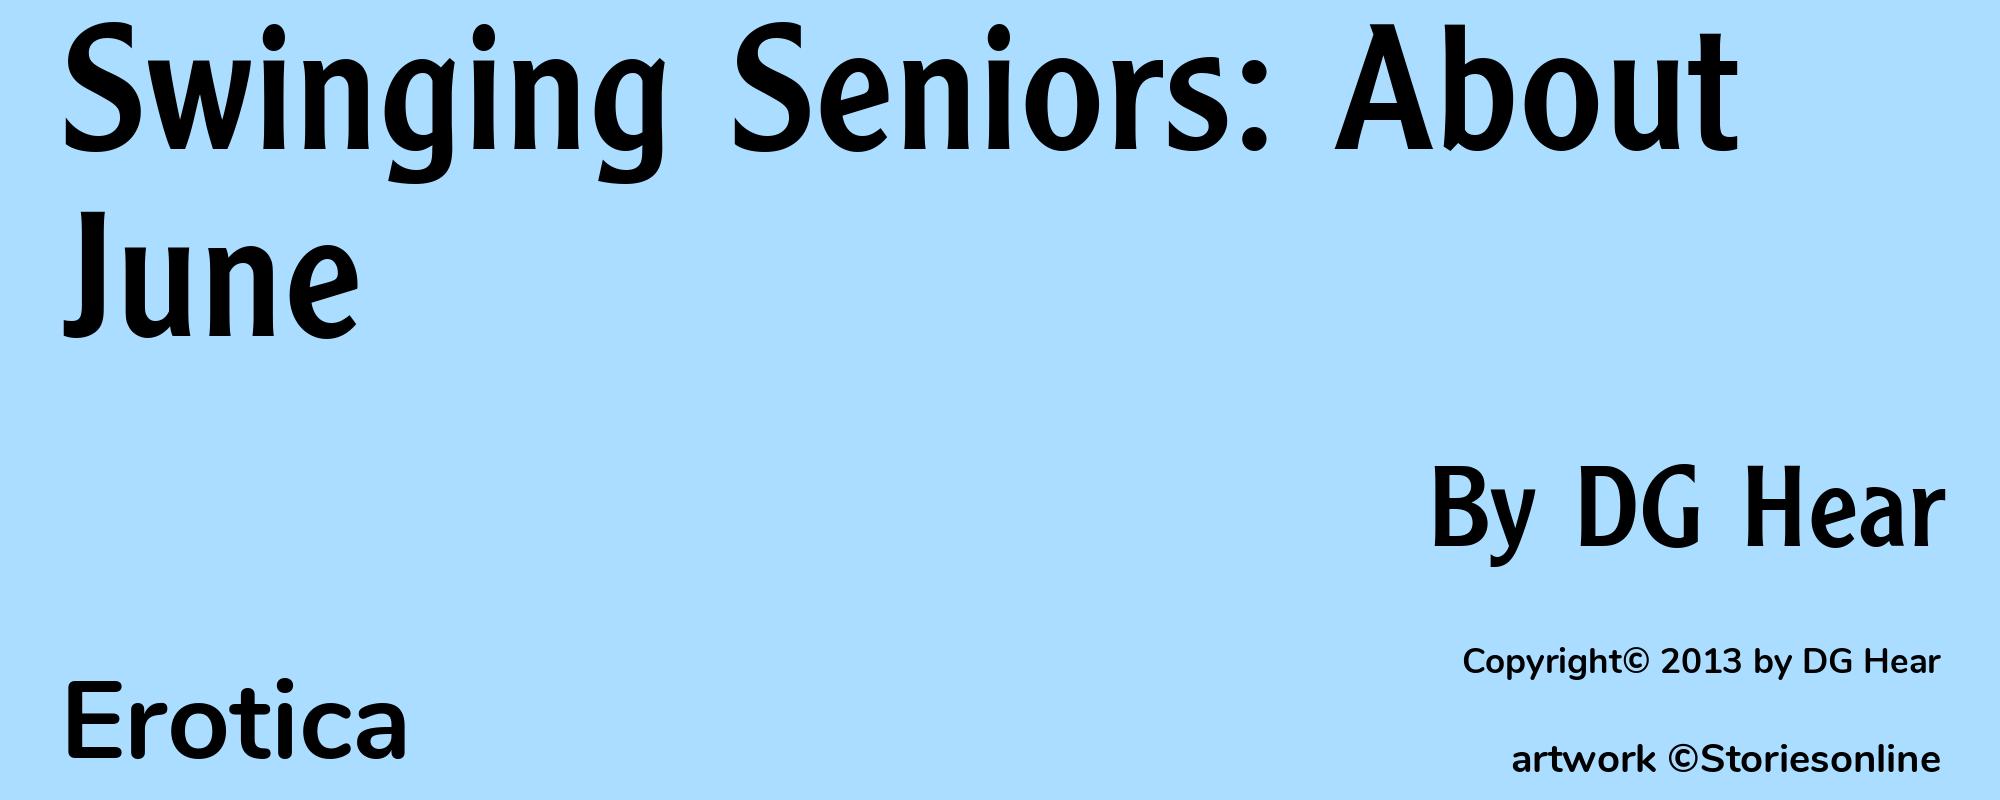 Swinging Seniors: About June - Cover